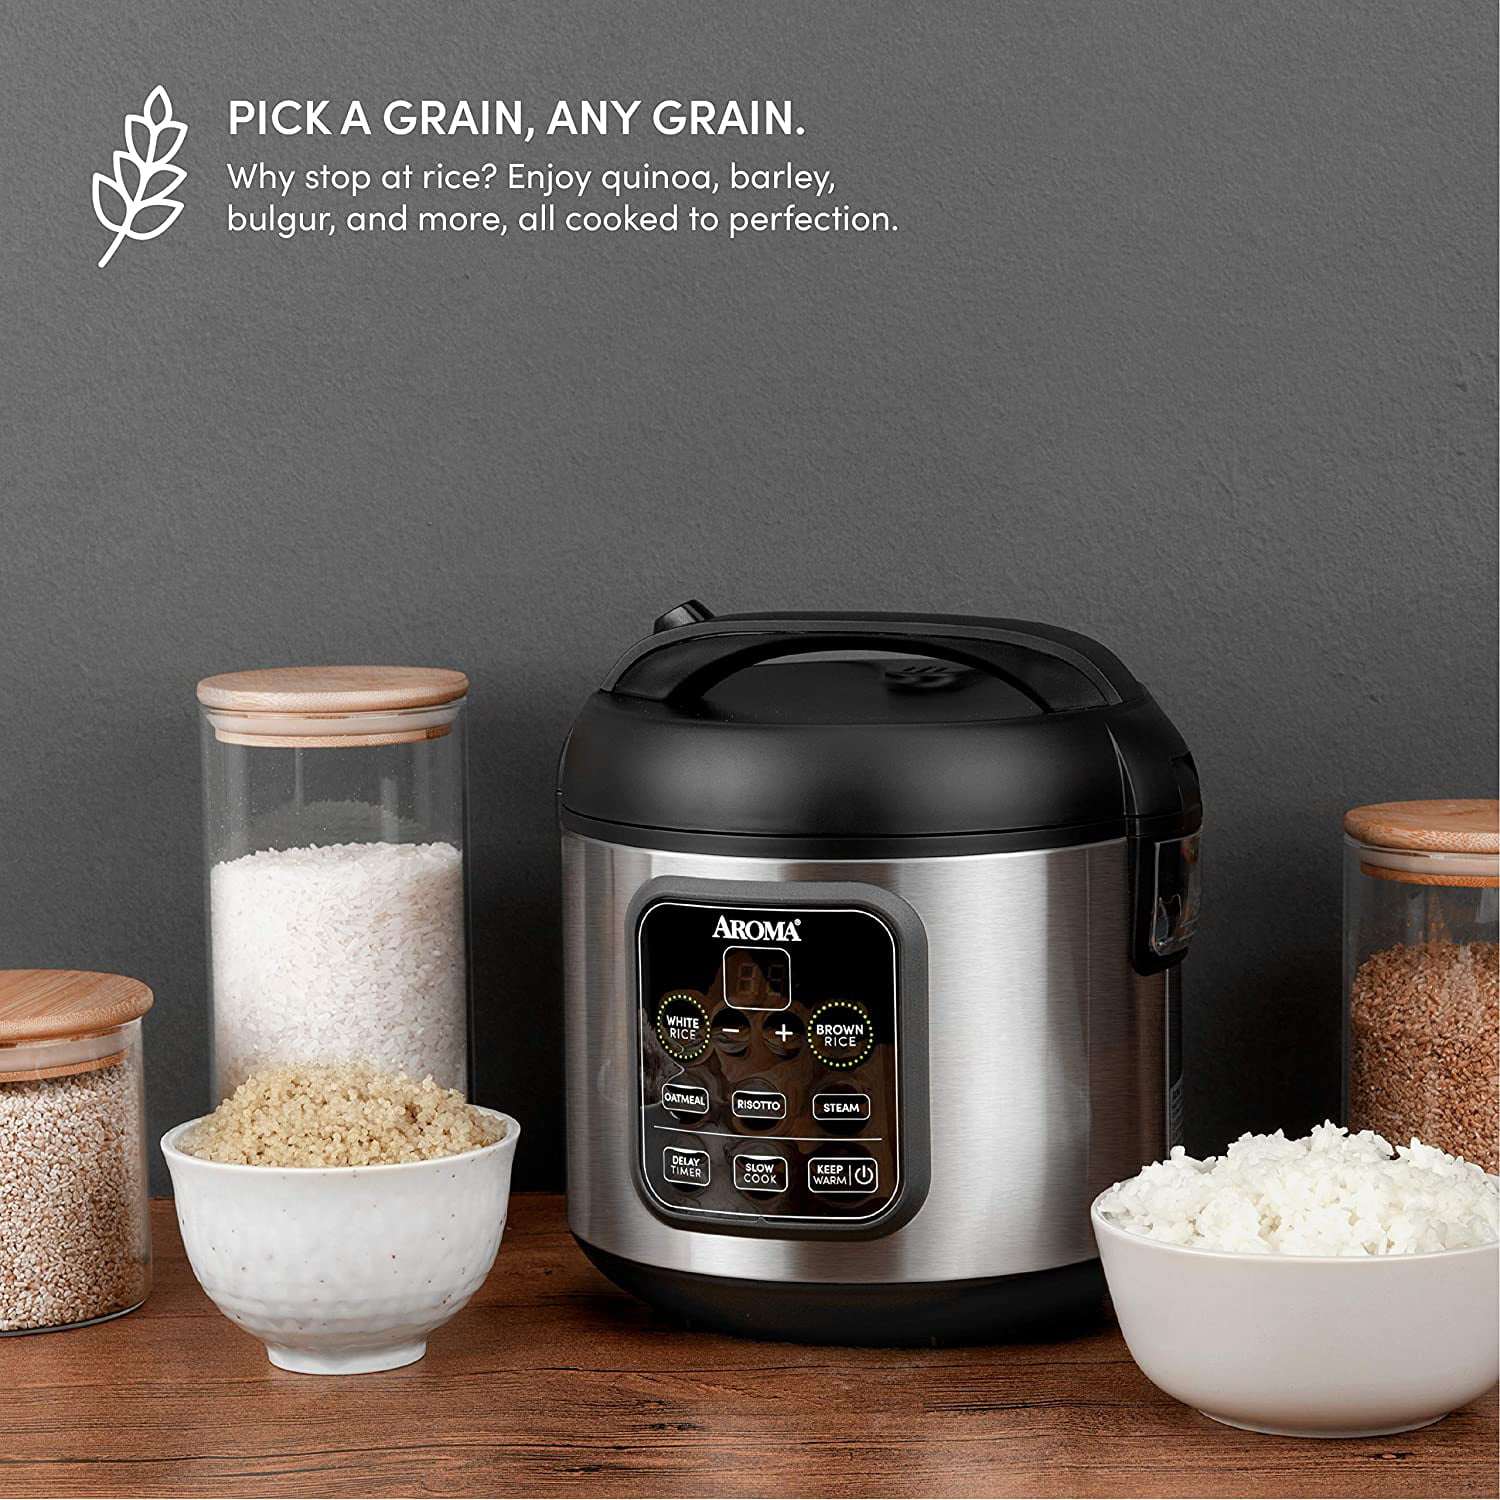 Aroma Rice /Steamer/Slow Cooker Model # ARC-150SB for Sale in Hoquiam, WA -  OfferUp